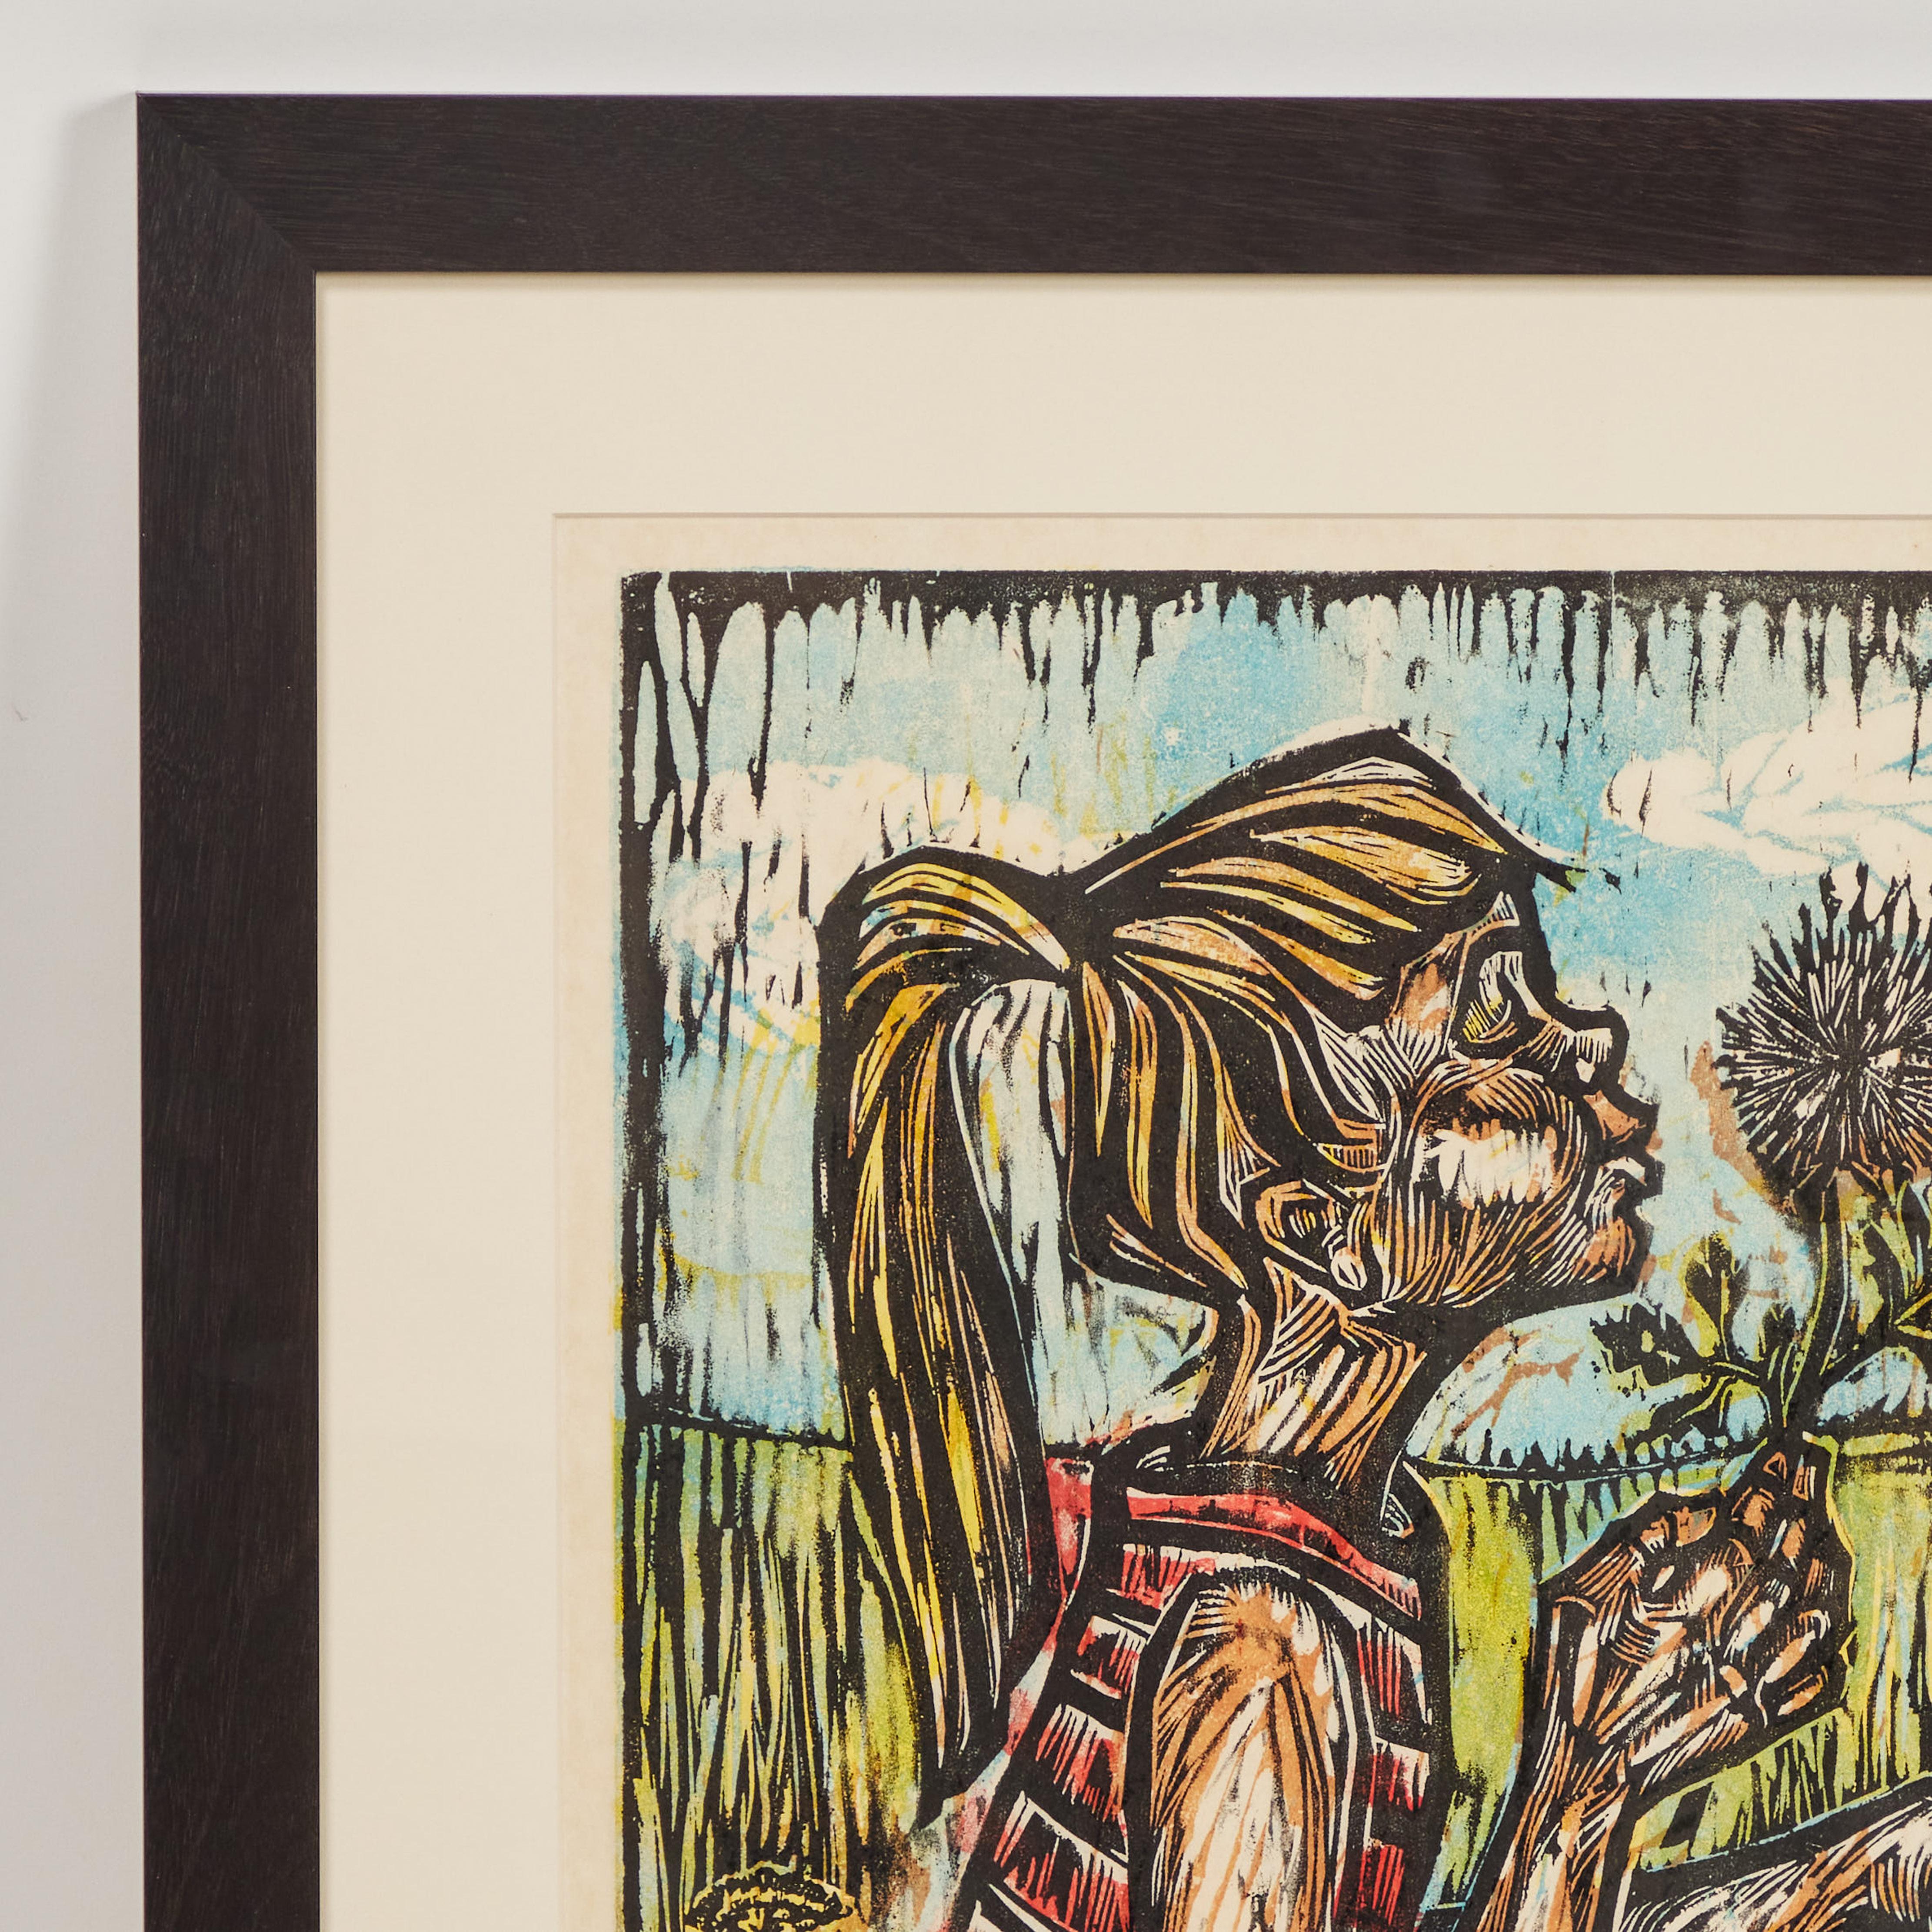 Happy and full of joy, this vintage woodcut of a seated little girl titled 'Wish'n Puff' is a complete delight. This charming hand-colored piece is signed by the artist Sister Mary Charles and numbered 60/60. It has been newly framed and ready to